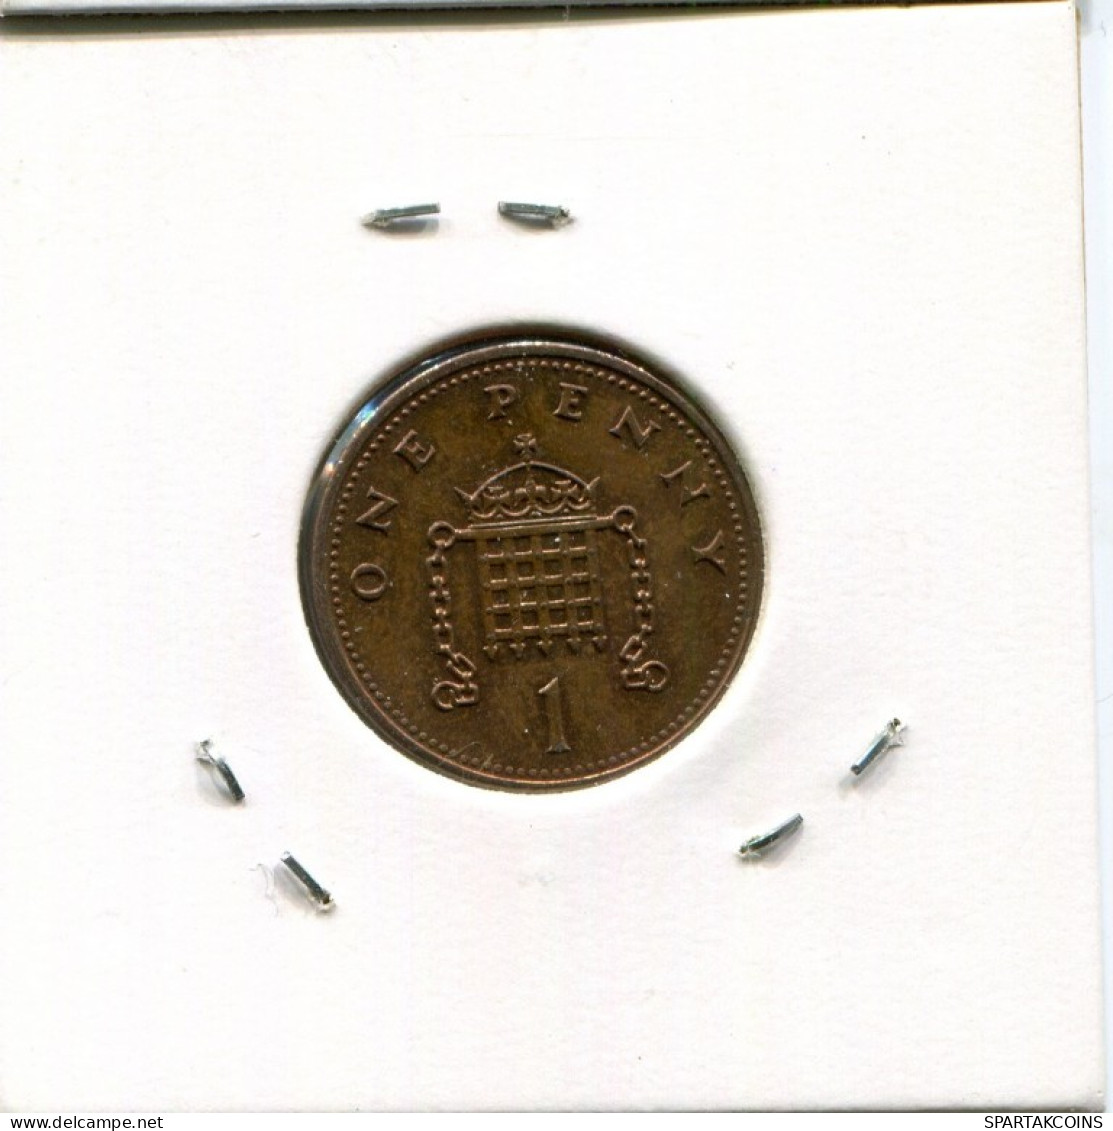 PENNY 1988 UK GRANDE-BRETAGNE GREAT BRITAIN Pièce #AN577.F.A - 1 Penny & 1 New Penny